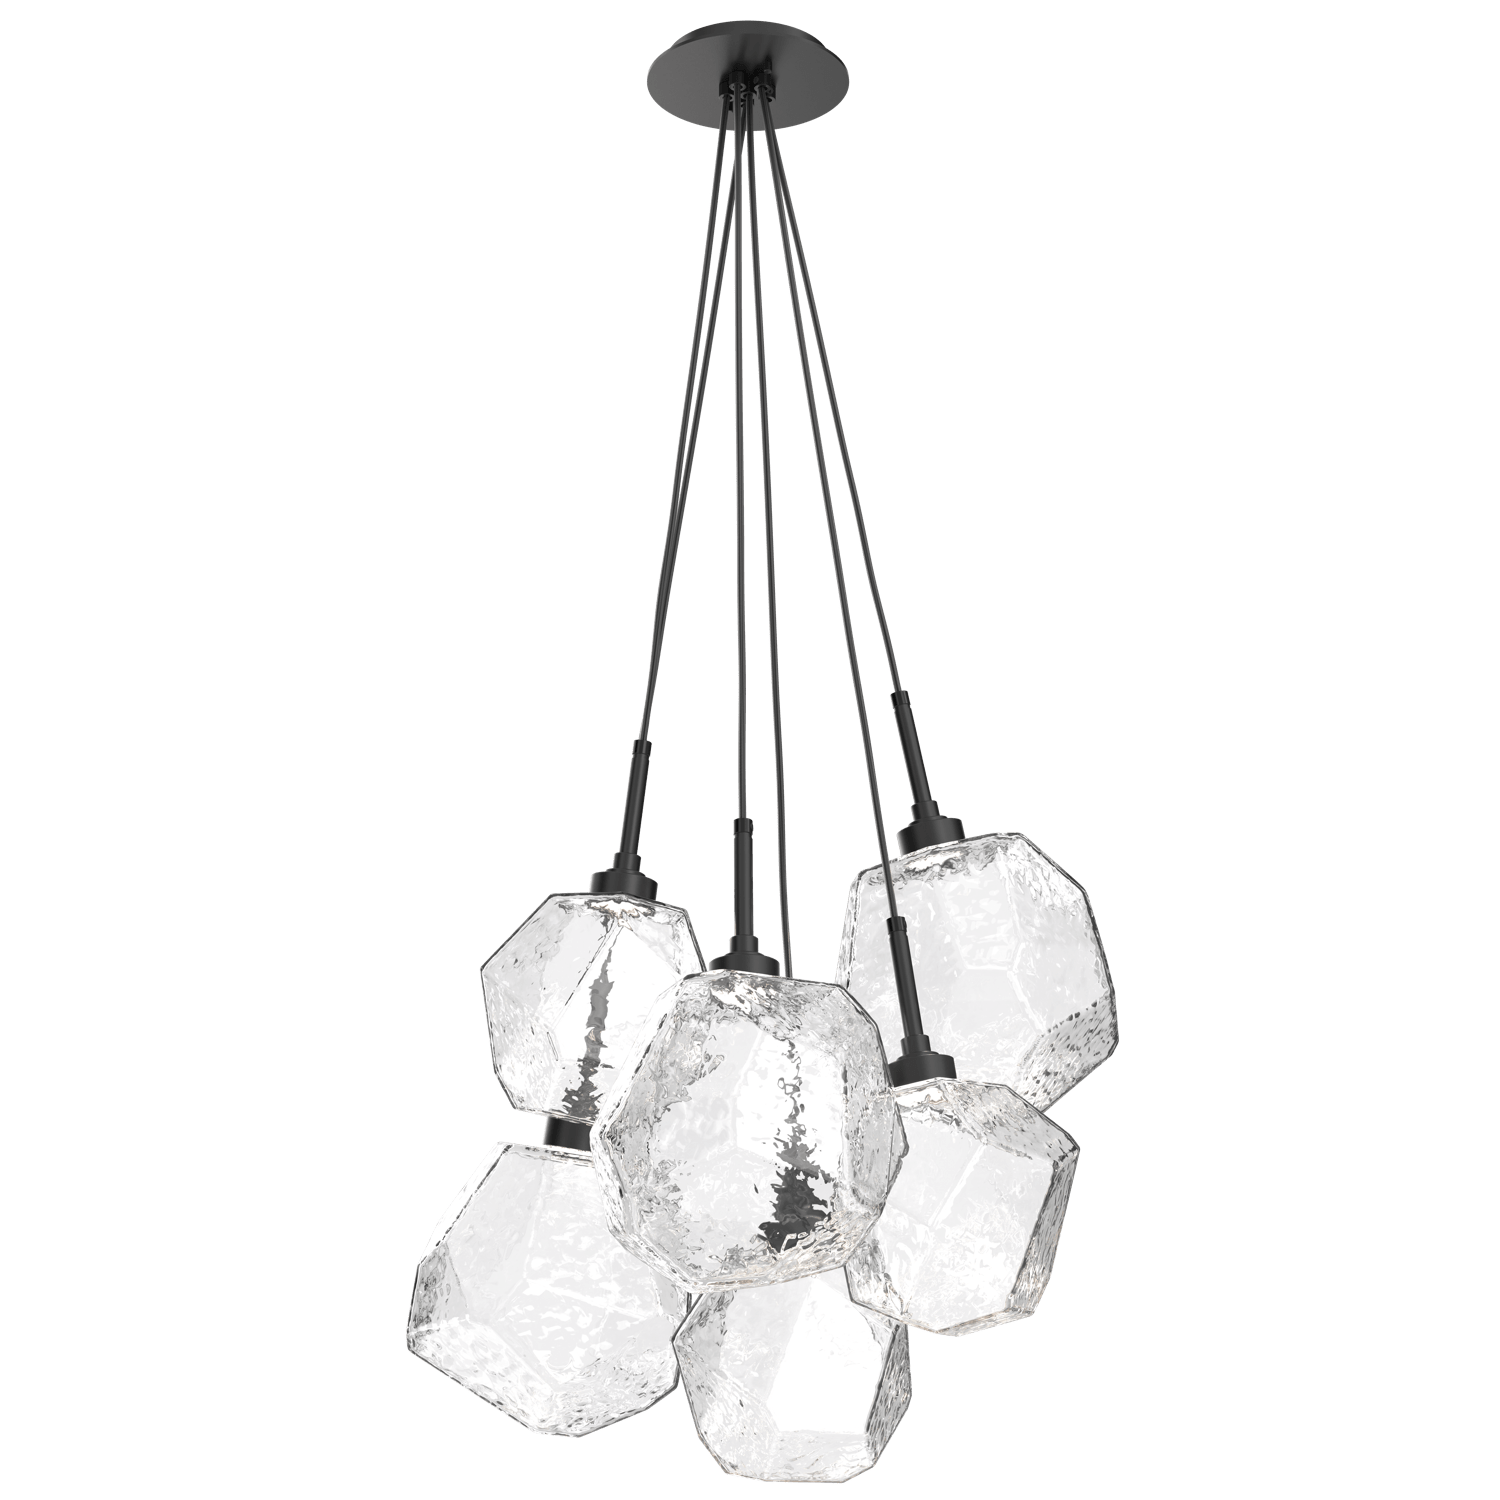 CHB0039-0F-MB-C-Hammerton-Studio-Gem-6-light-cluster-pendant-light-with-matte-black-finish-and-clear-blown-glass-shades-and-LED-lamping